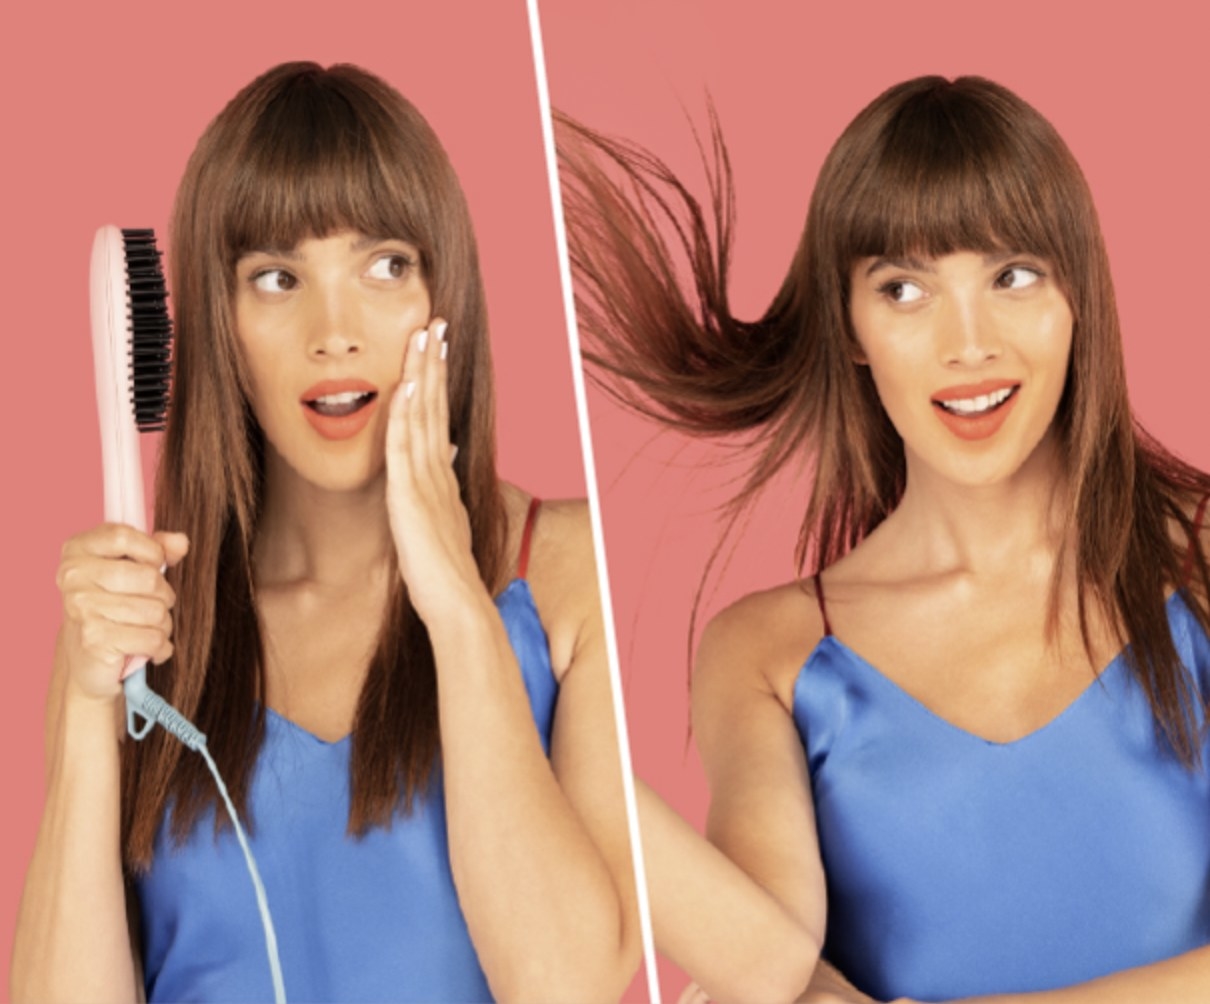 A side-by-side photo of a person holding the heated straightening tool playing with their hair